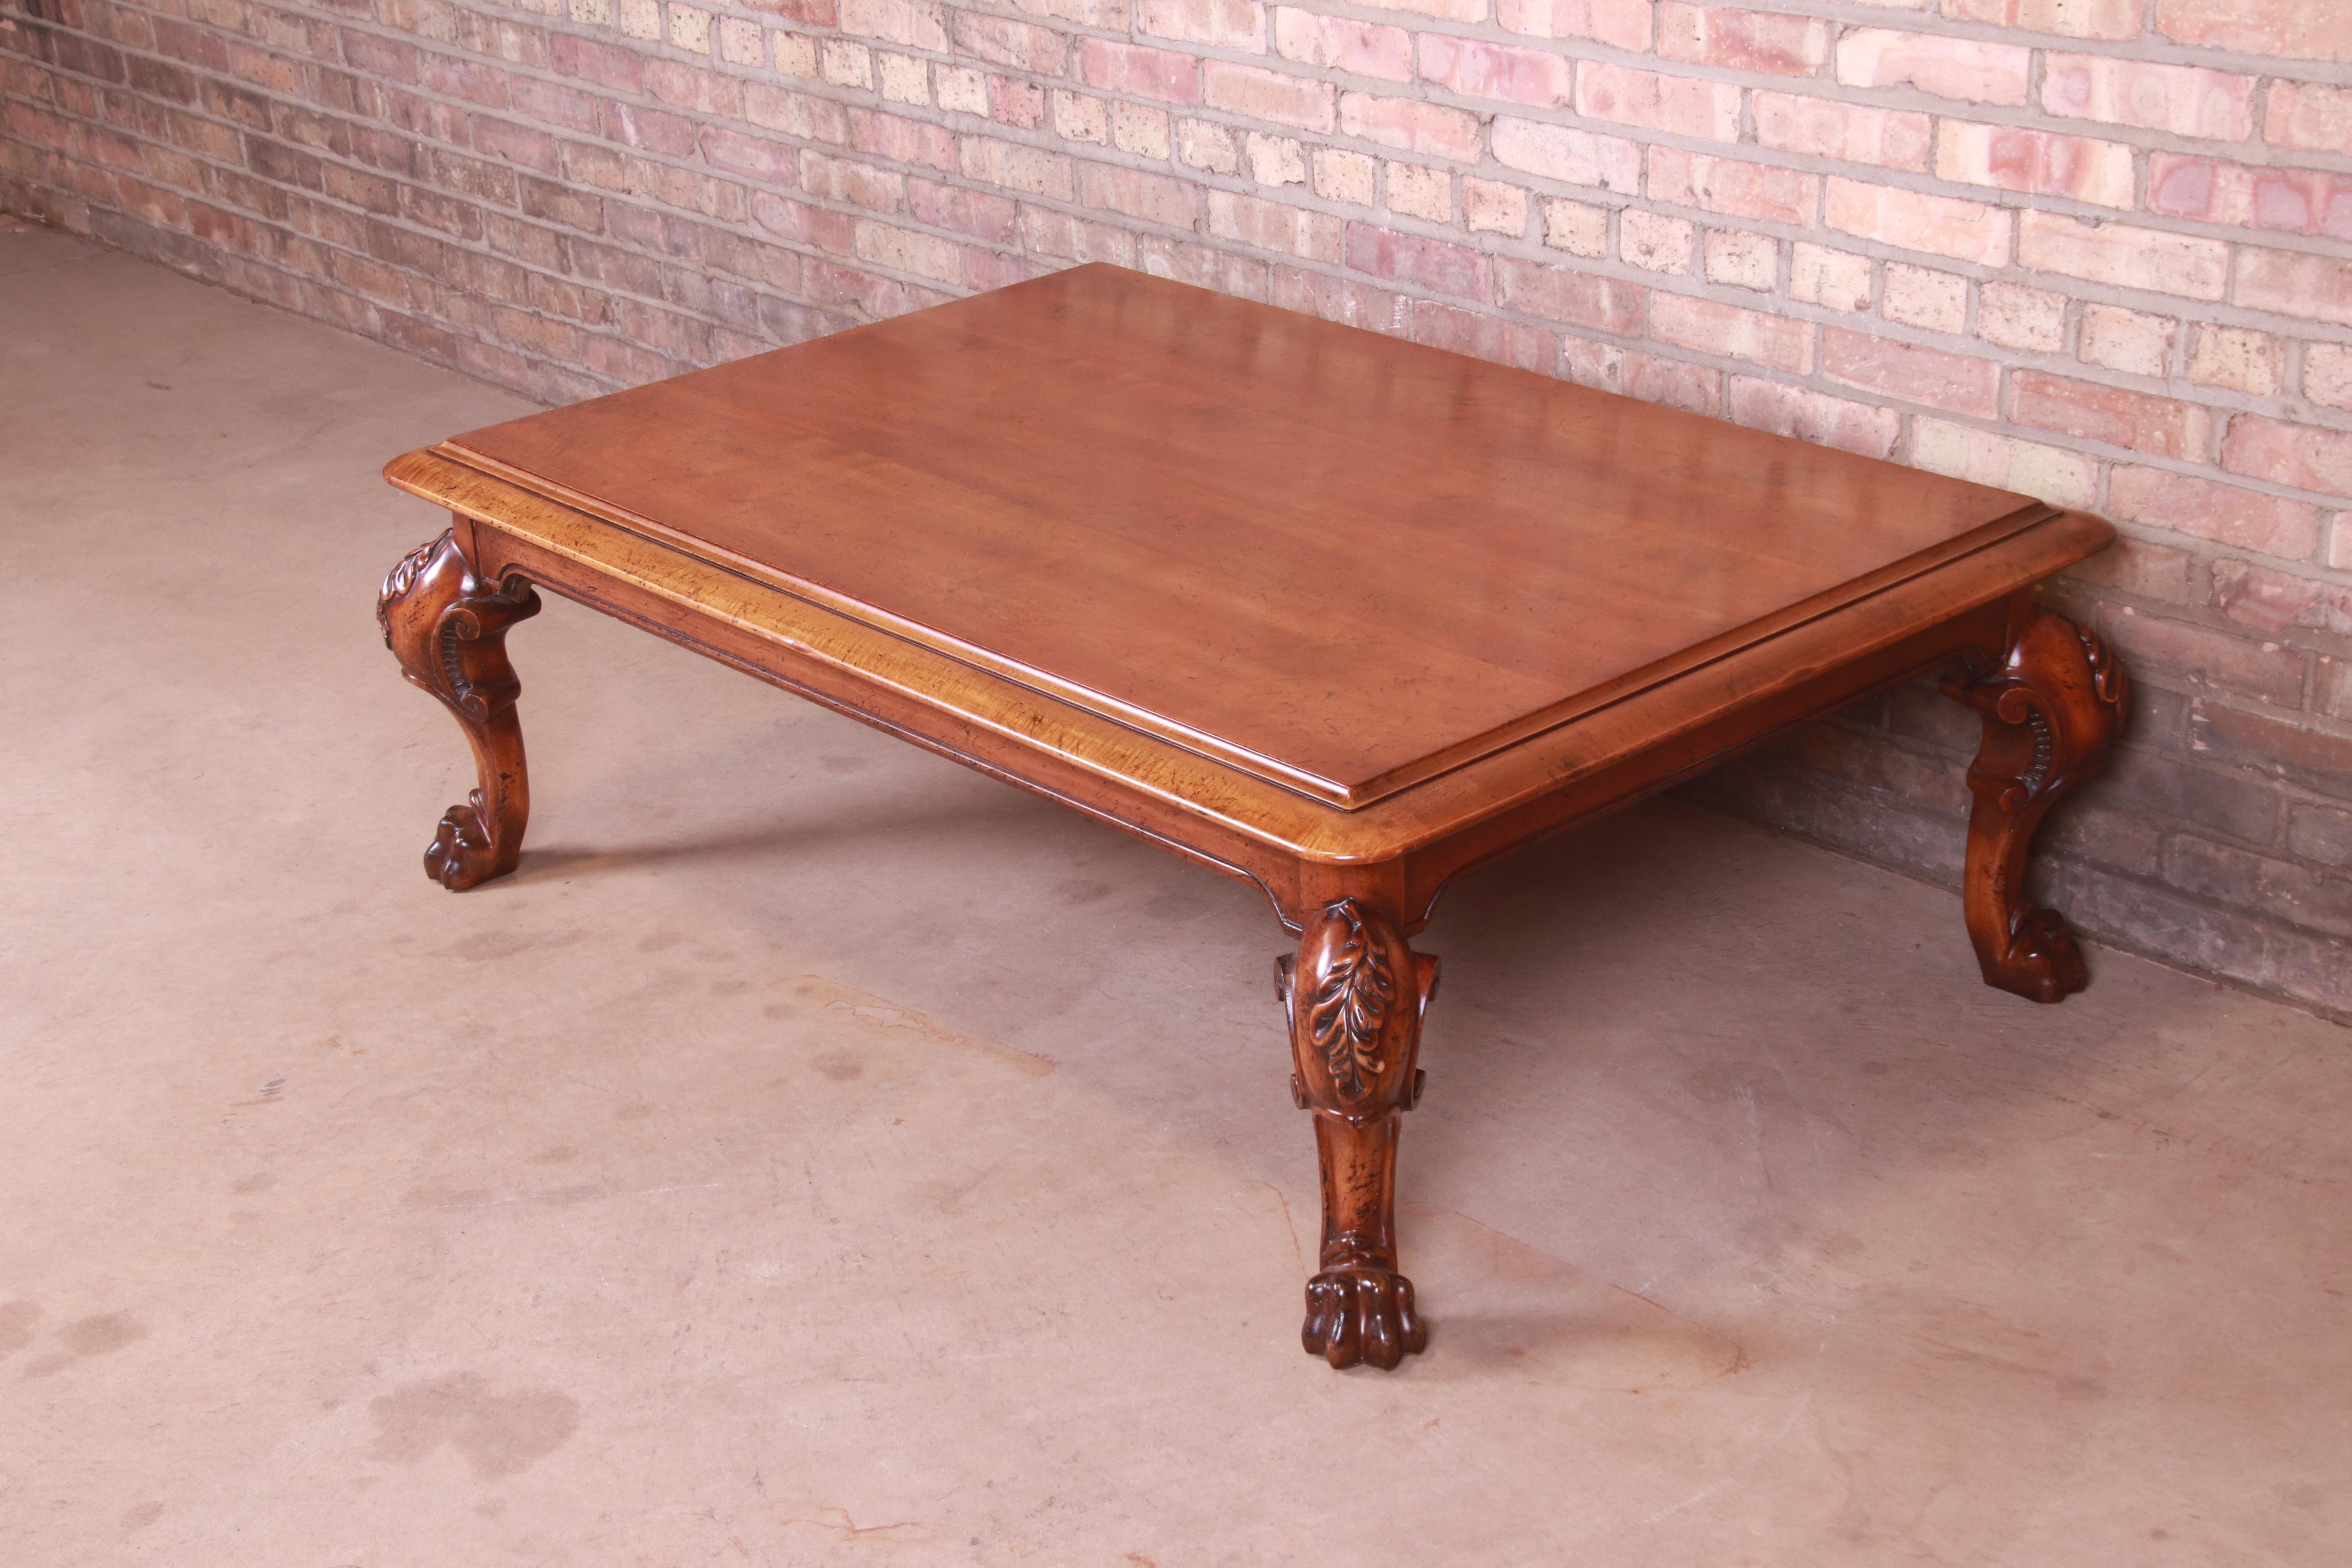 A gorgeous Georgian or Chippendale style coffee or cocktail table

By Ralph Lauren, 